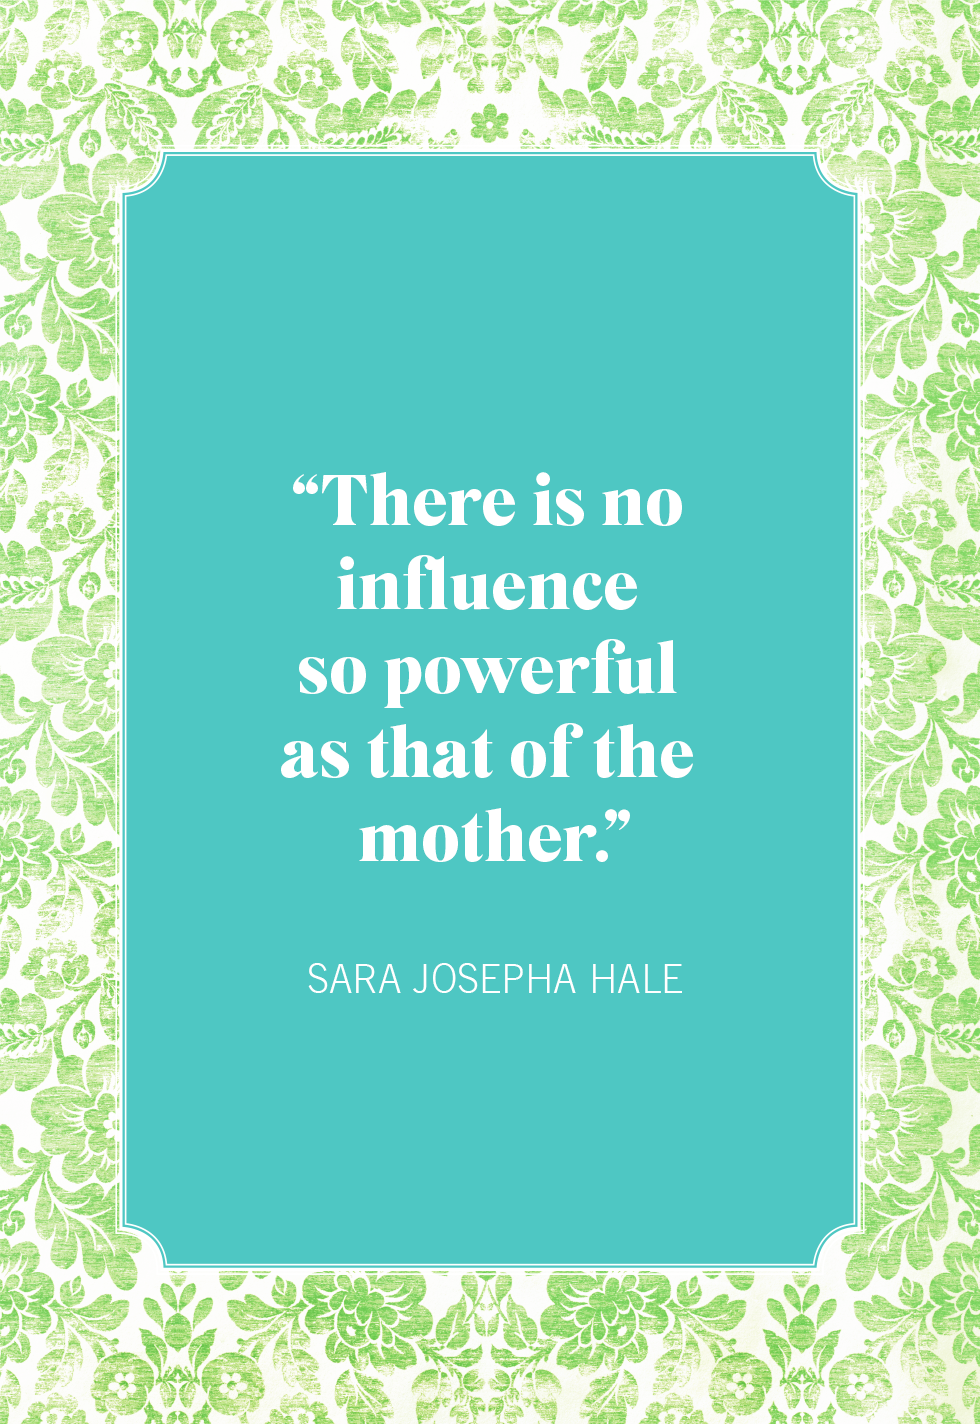 40 Best Mother's Day Quotes - Beautiful Sayings About Motherhood